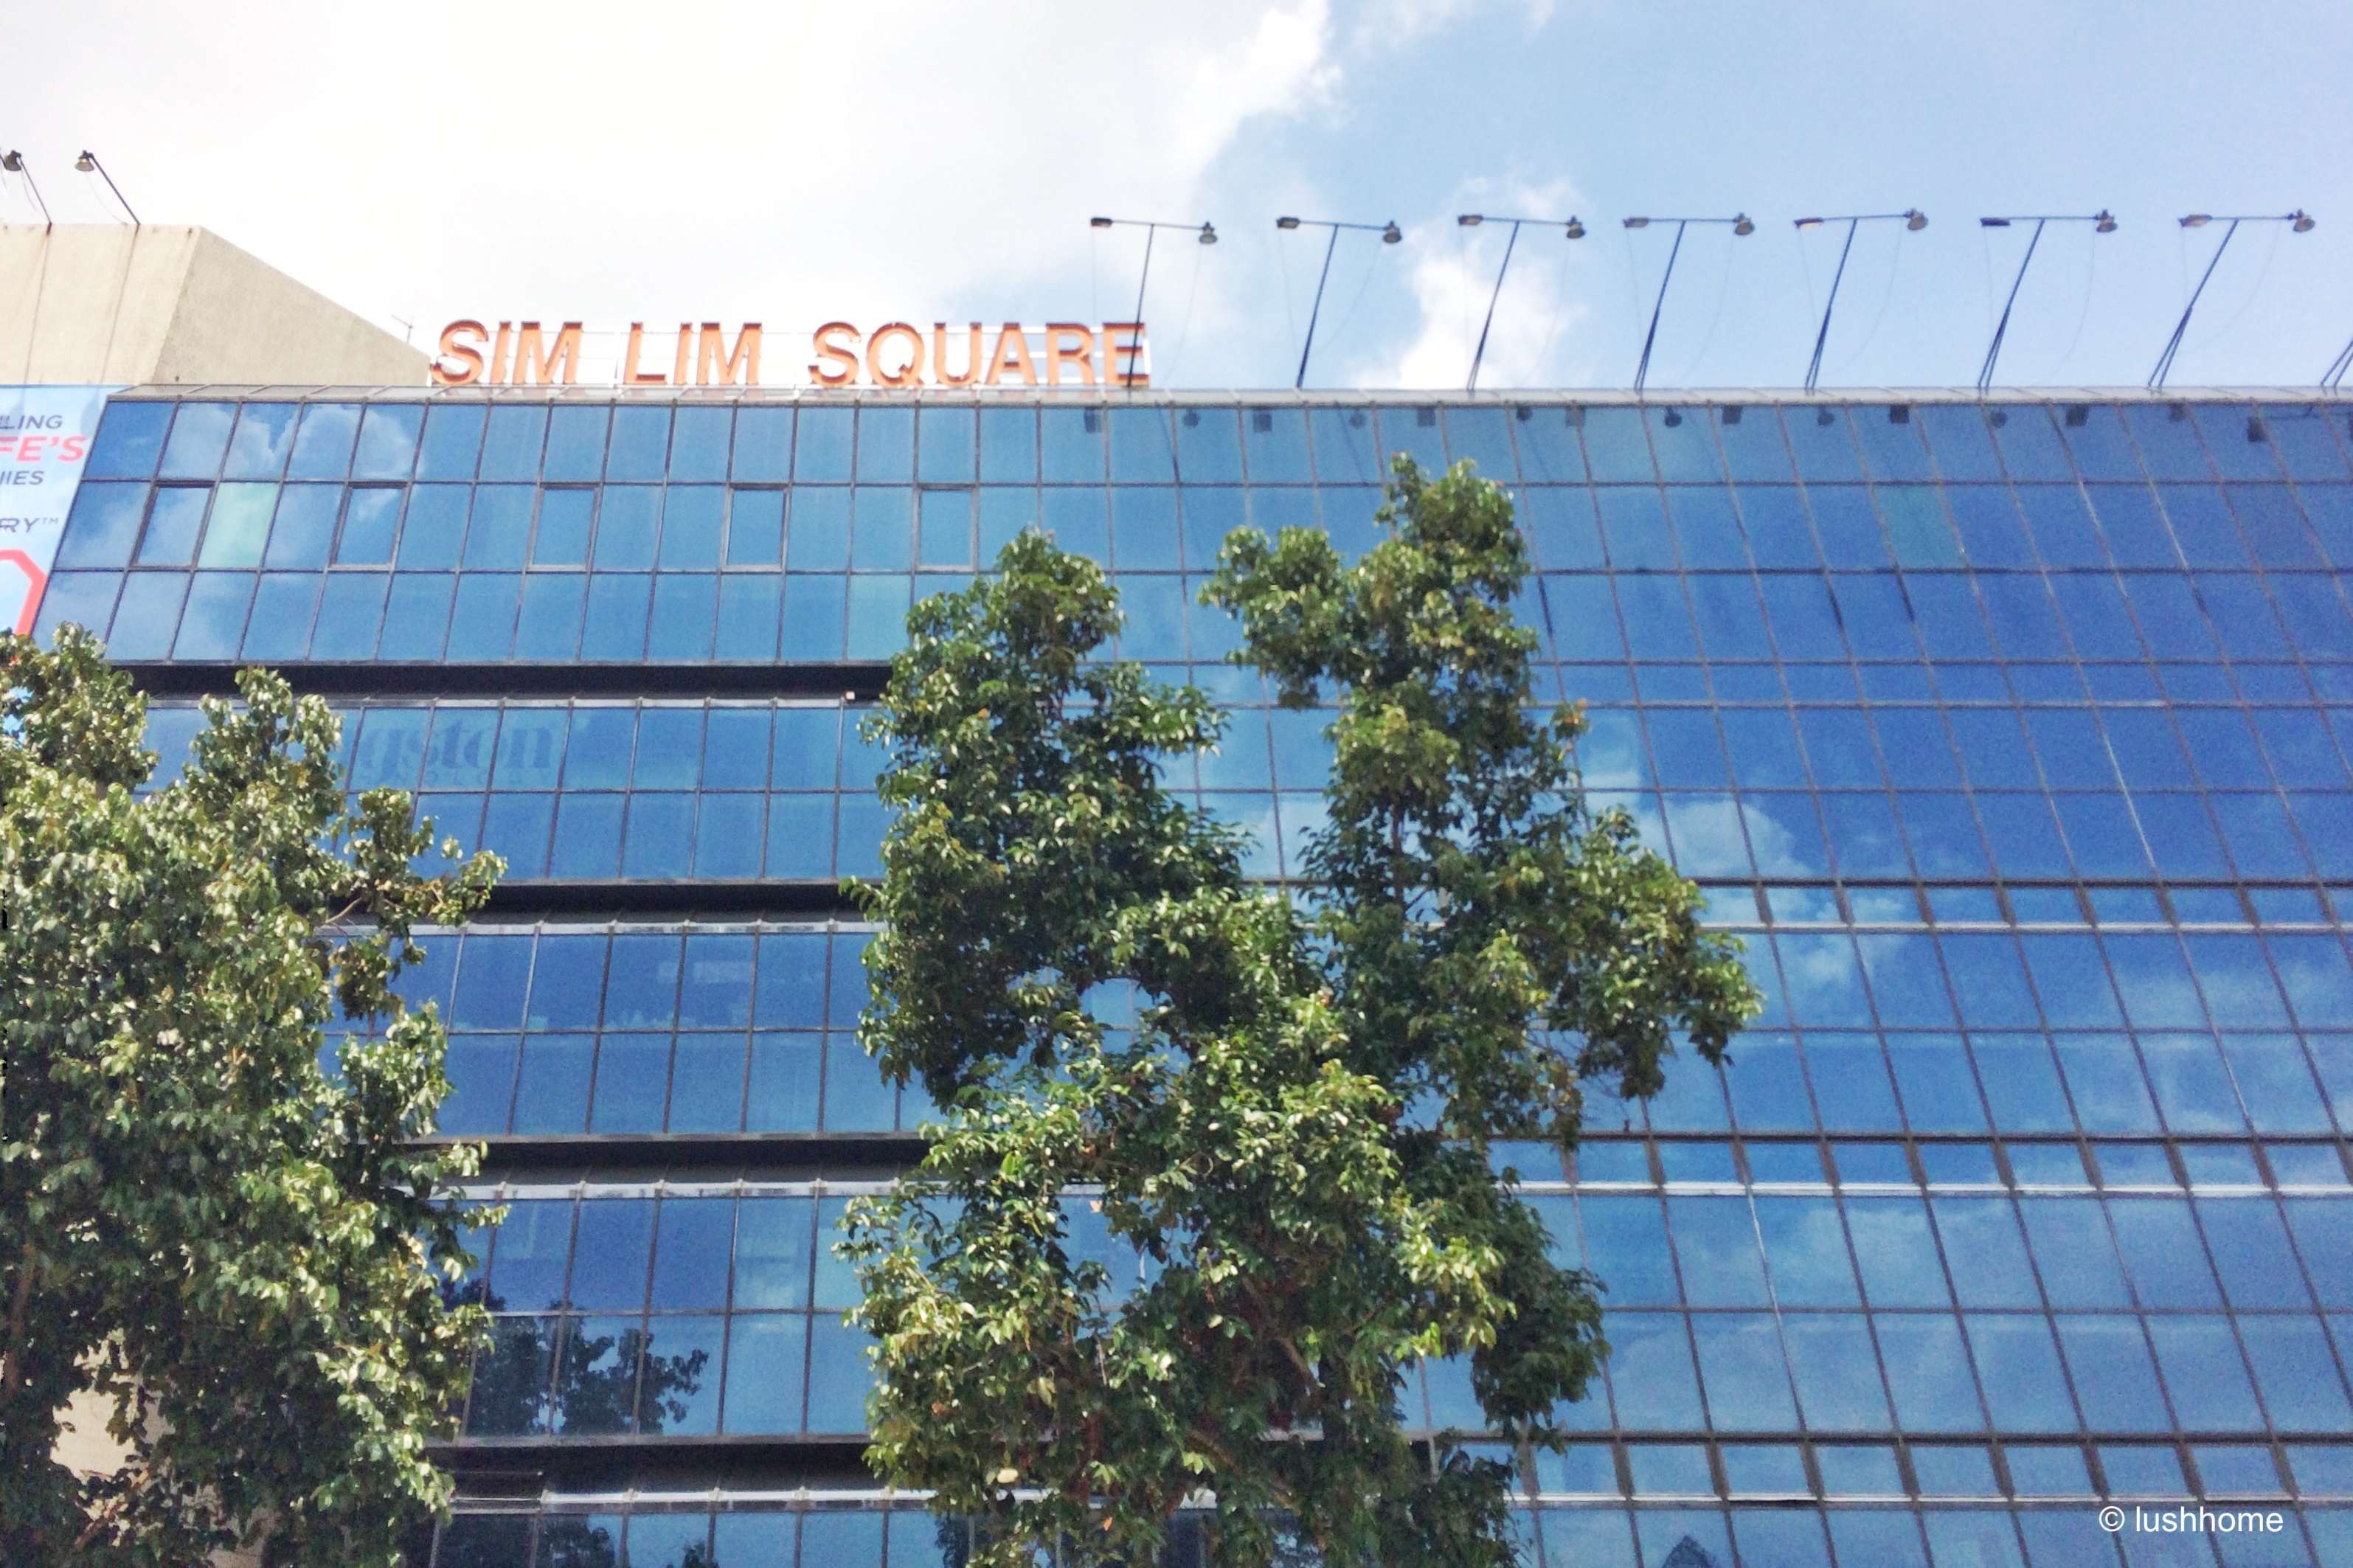 Sim Lim Square up for en bloc sale with S$1.25b reserve price